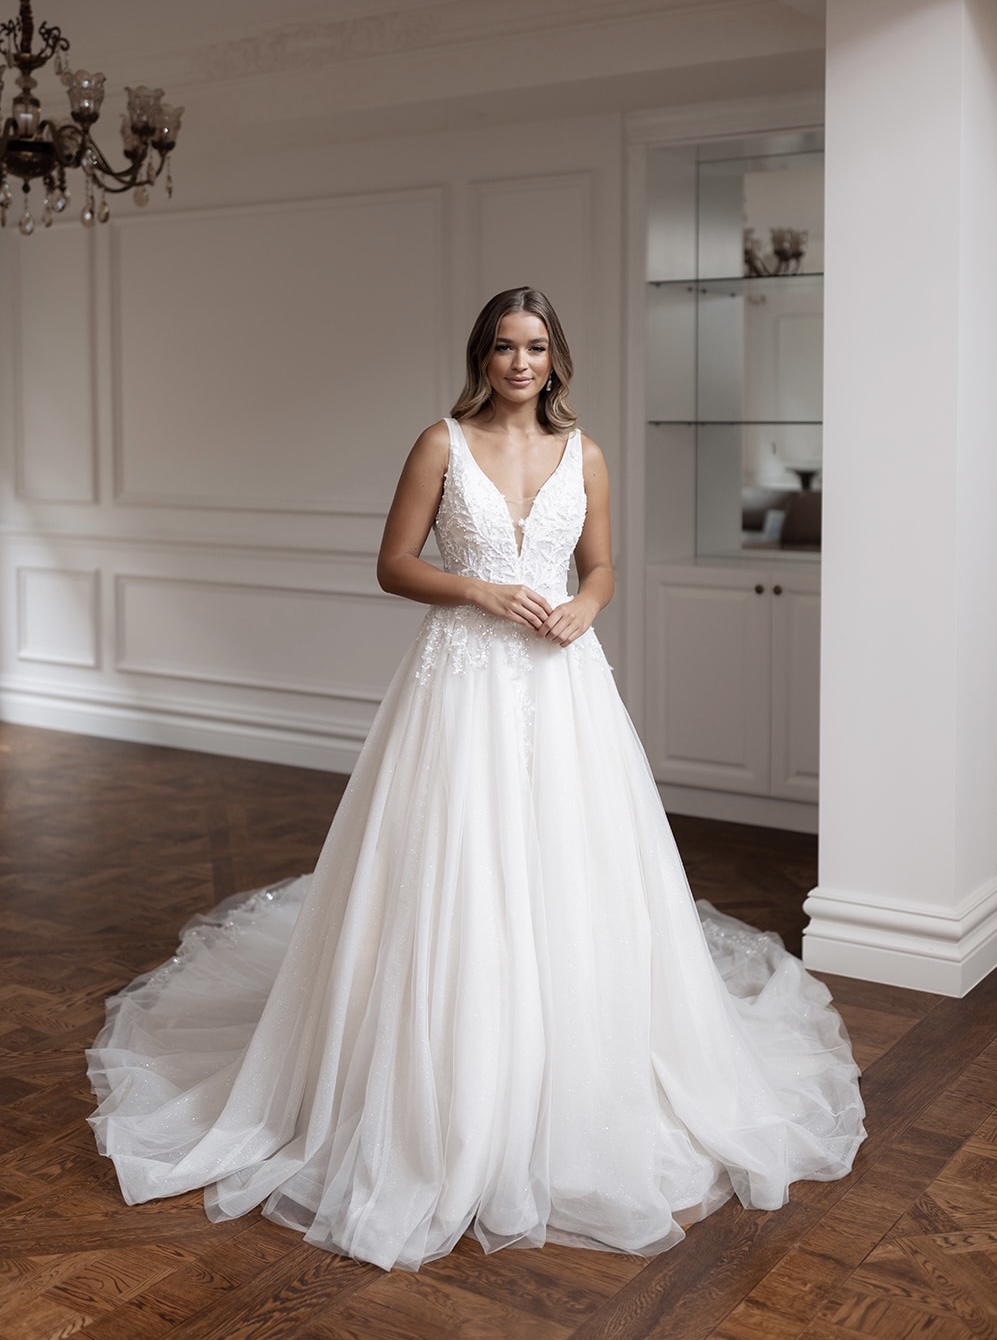 A classic Ball Gown